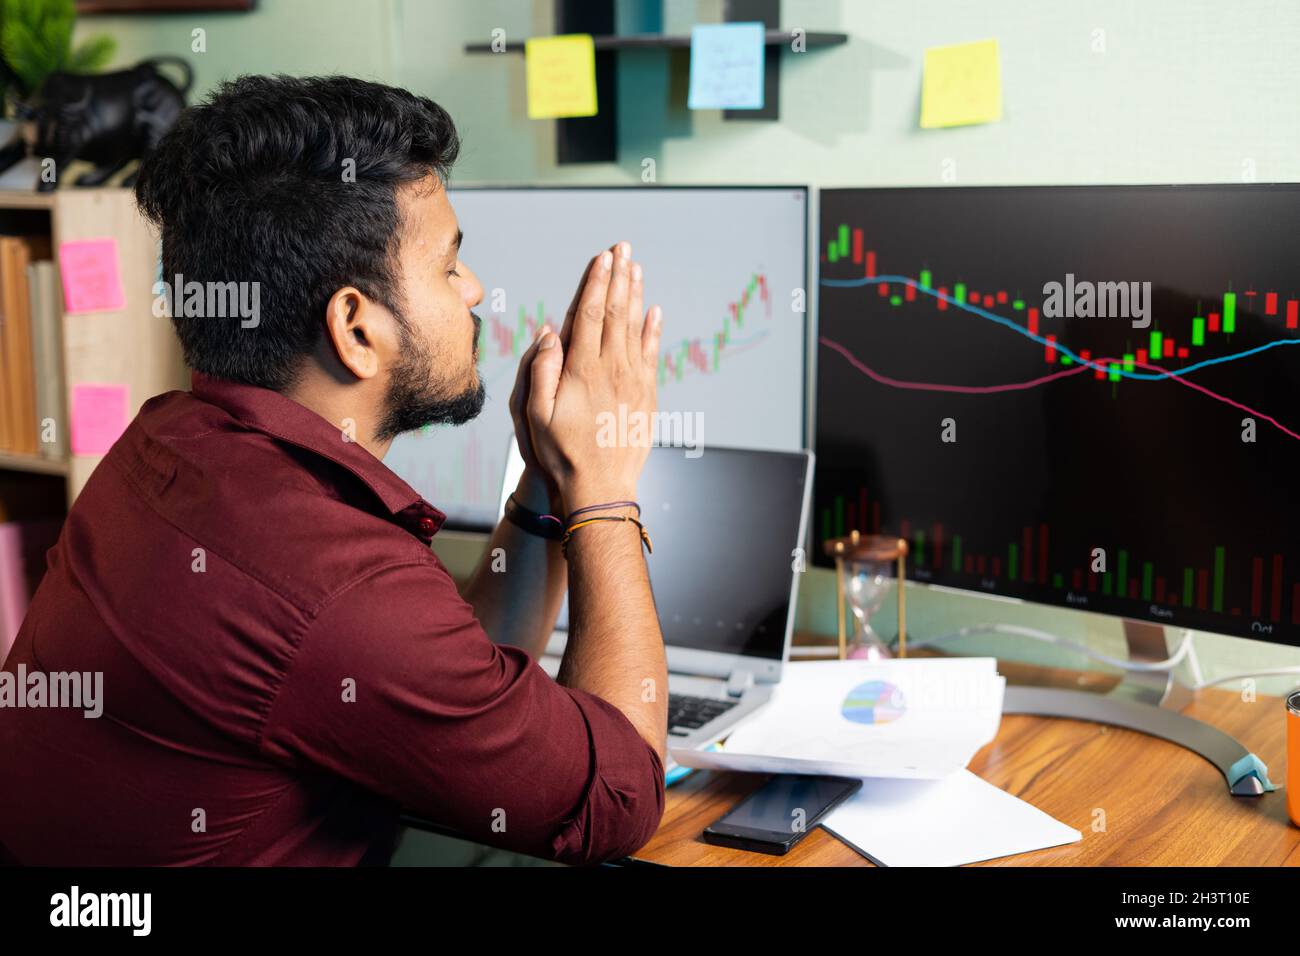 Worried trader praying god to make profit or stock market to go up infront of charts on computer screan - Concept of risk in crypto trading and Stock Photo